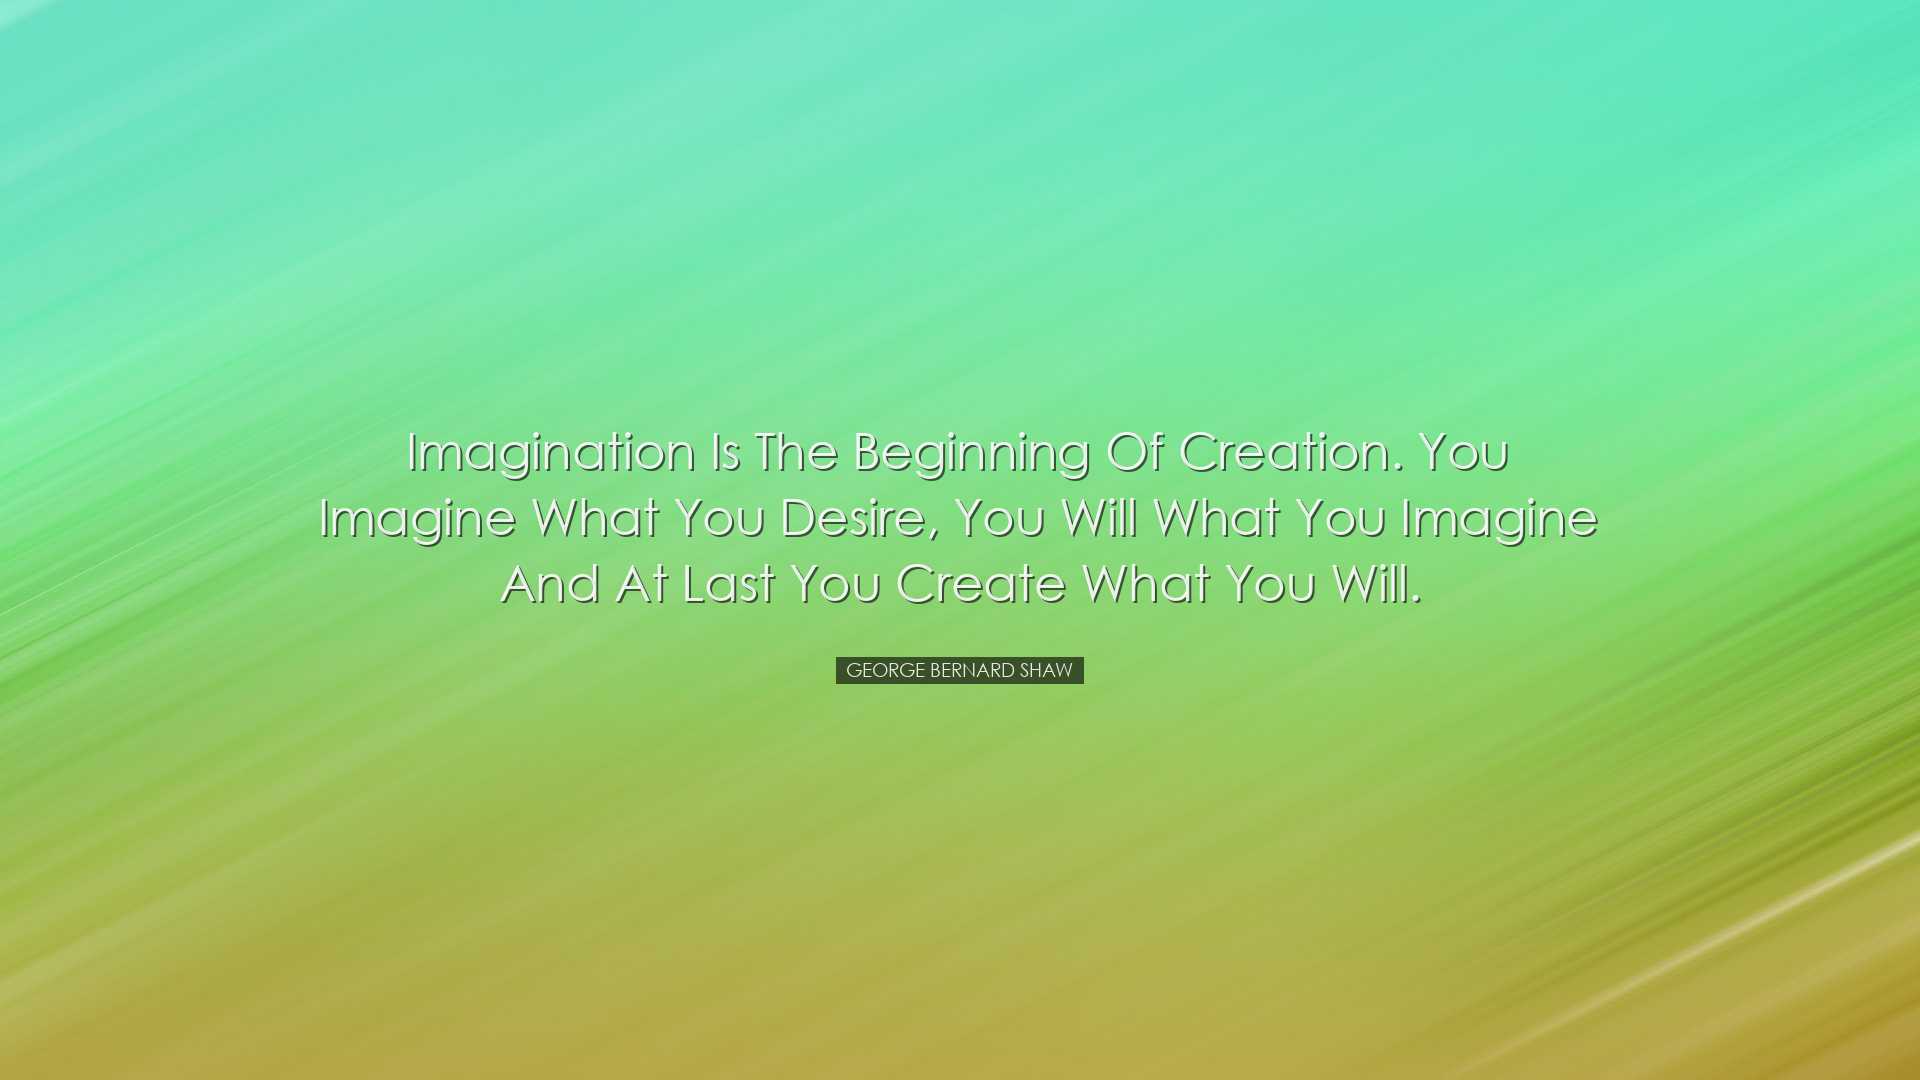 Imagination is the beginning of creation. You imagine what you des